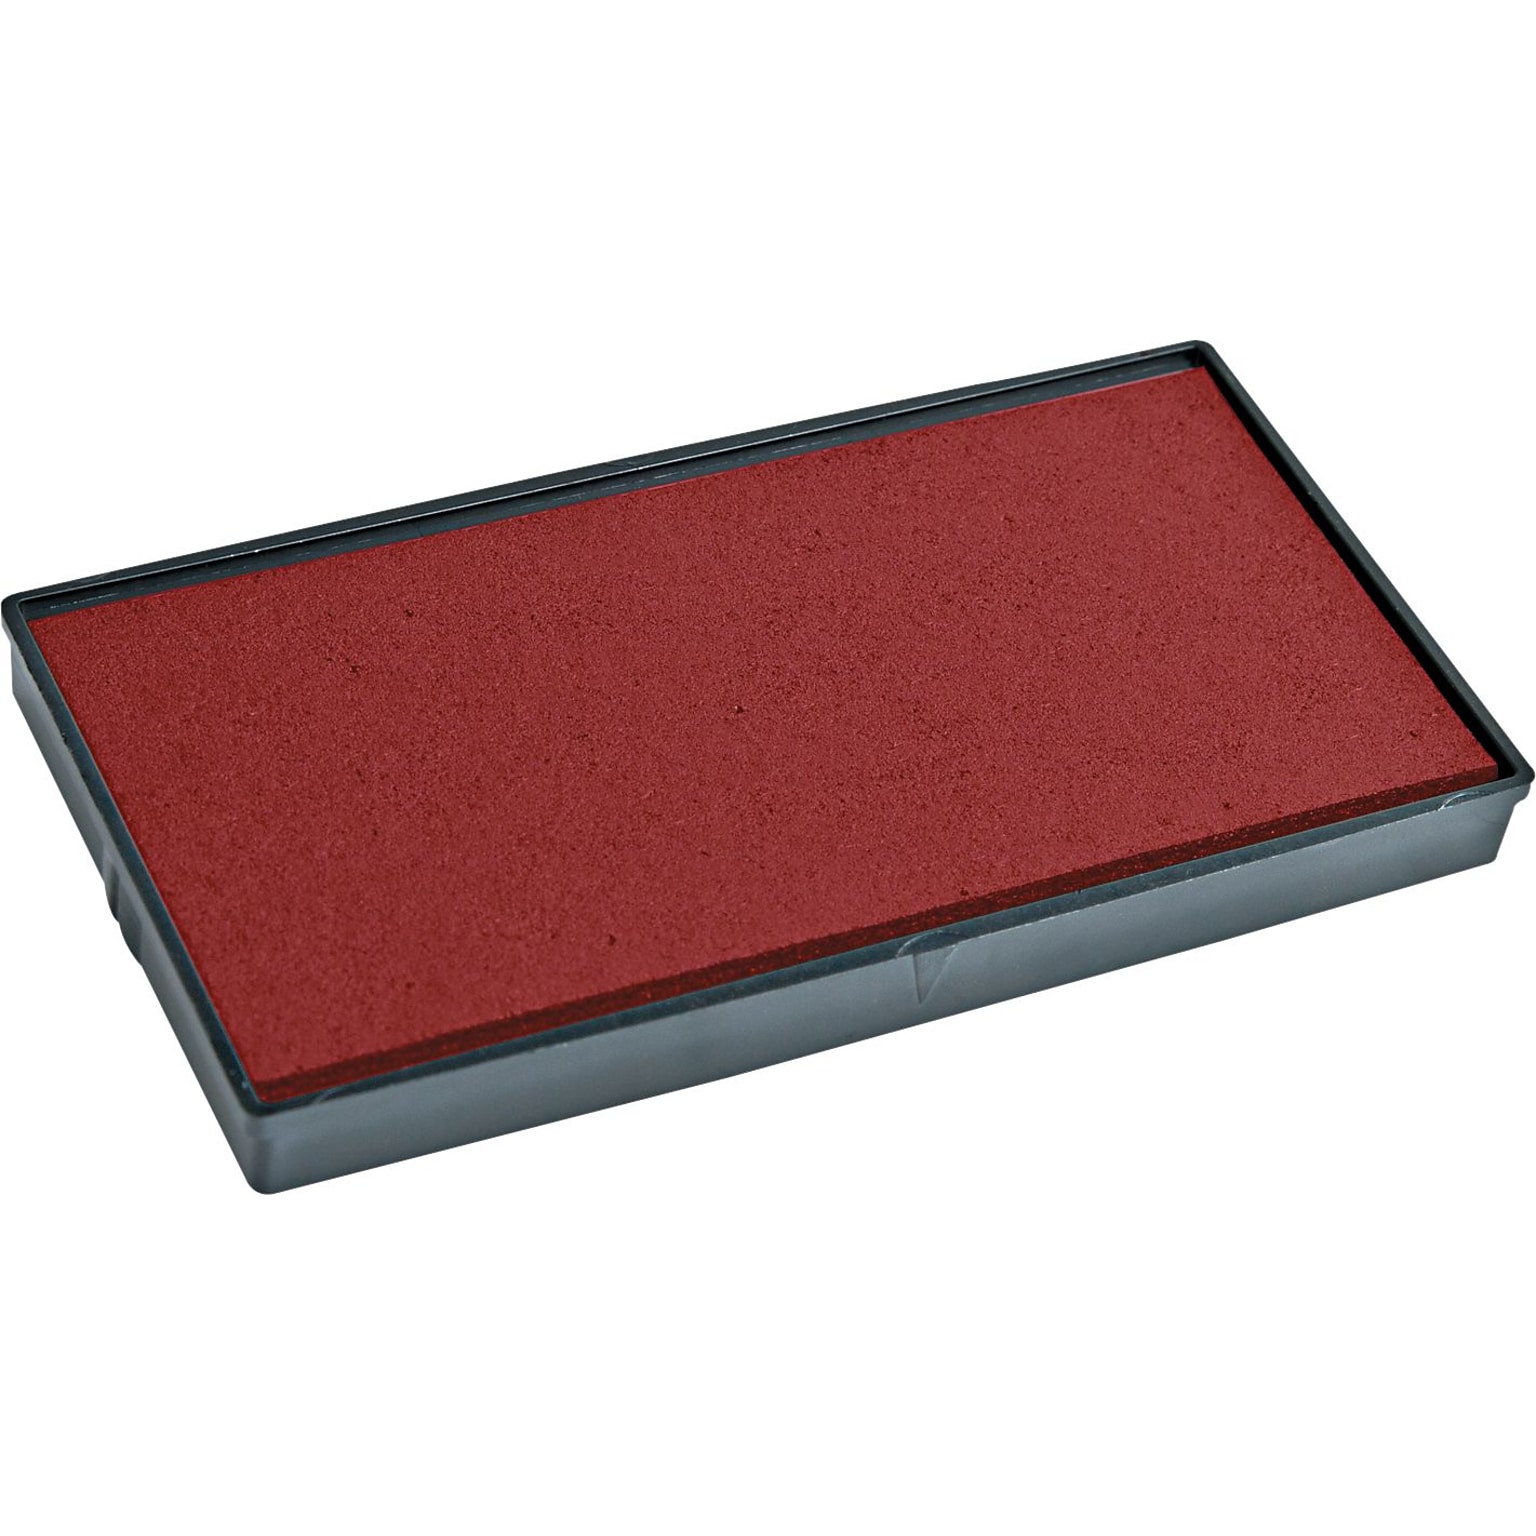 2000 PLUS Replacement Ink Pad for Printer P15, Red (COS065488)